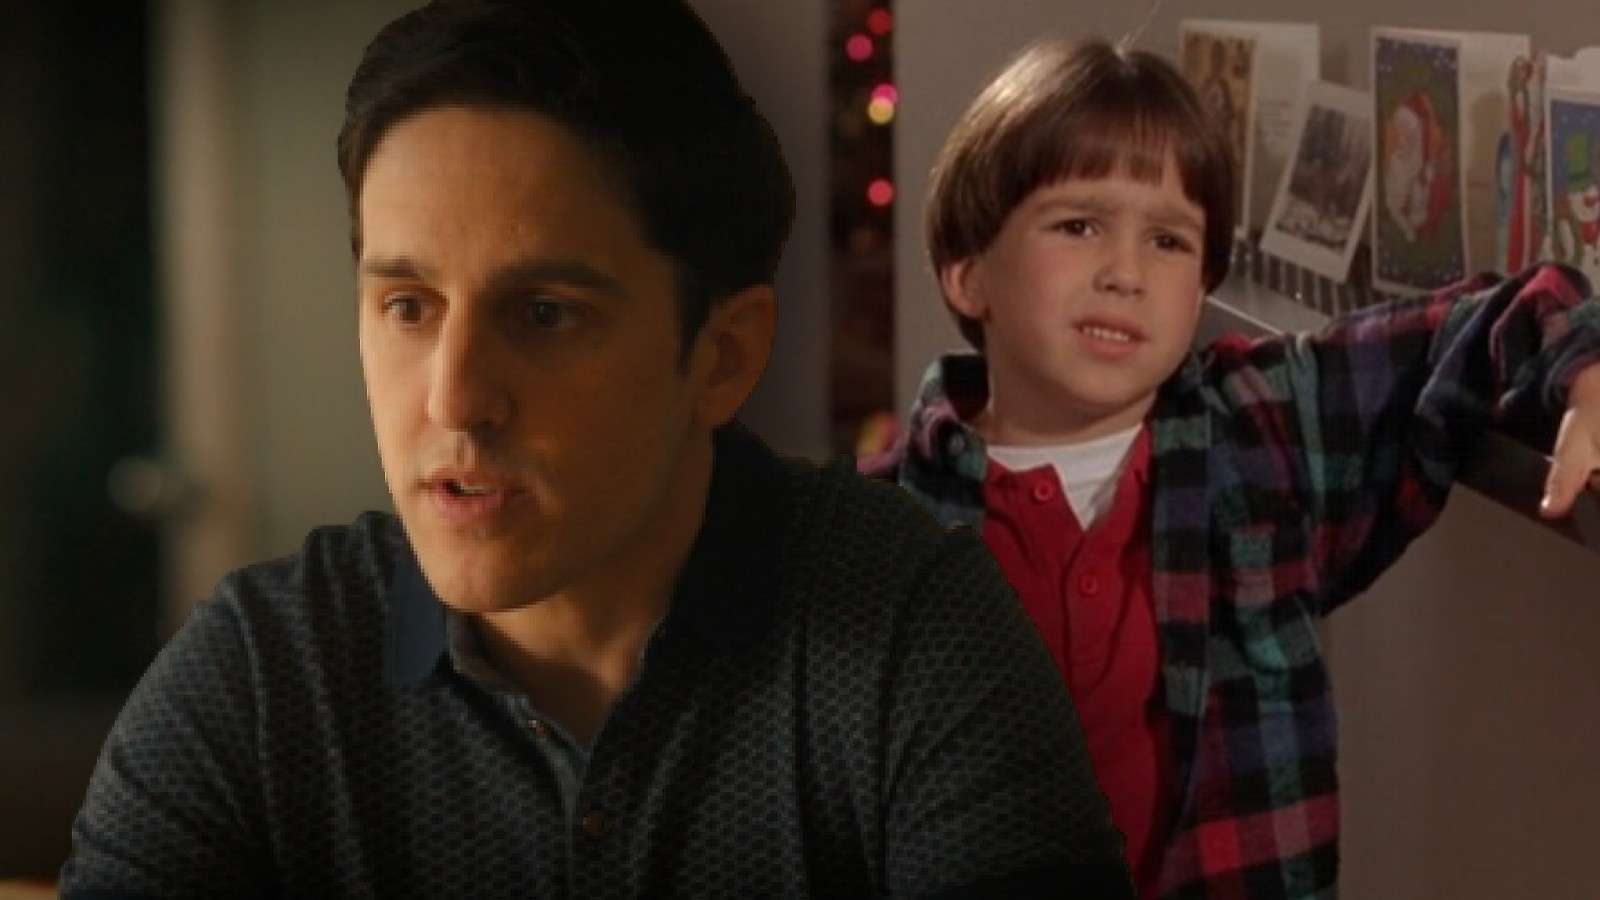 Eric Lloyd as Charlie Calvin in The Santa Clauses and The Santa Clause